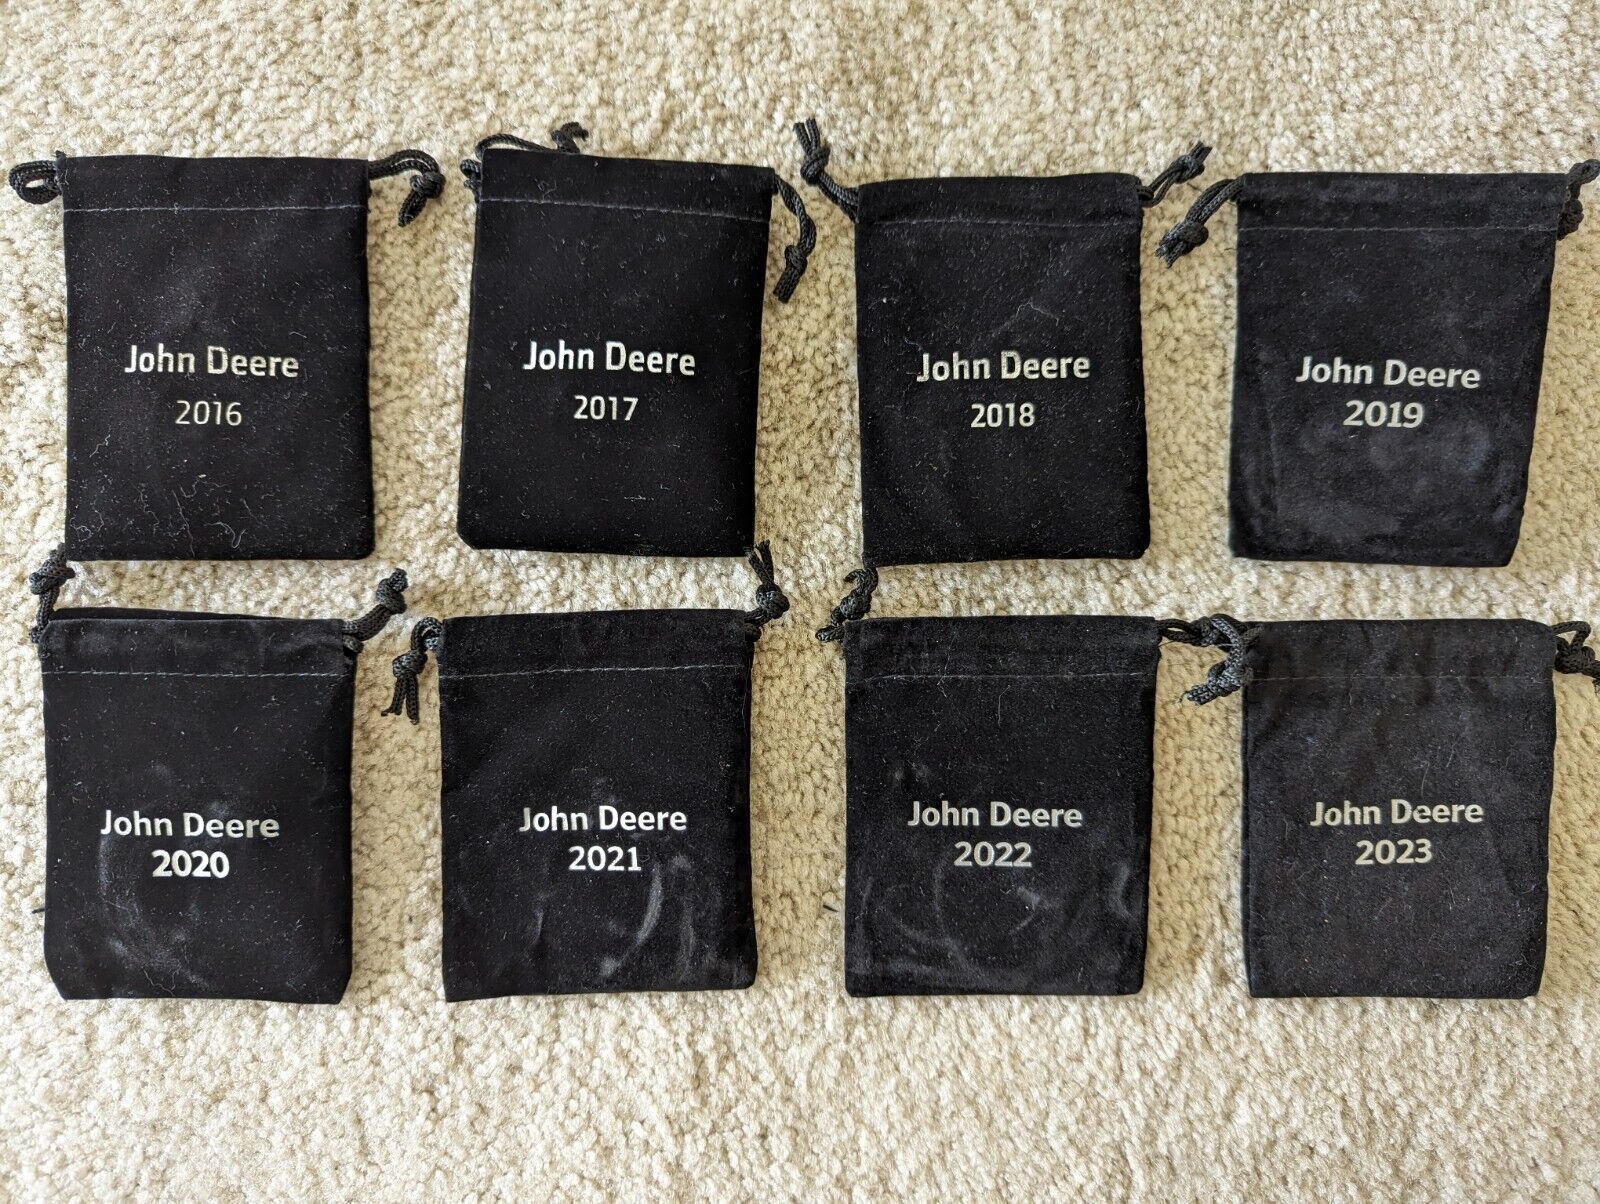 John Deere Pewter Ornaments 2016 2017 2018 2019 2020 2021 2022 2023 with pouches